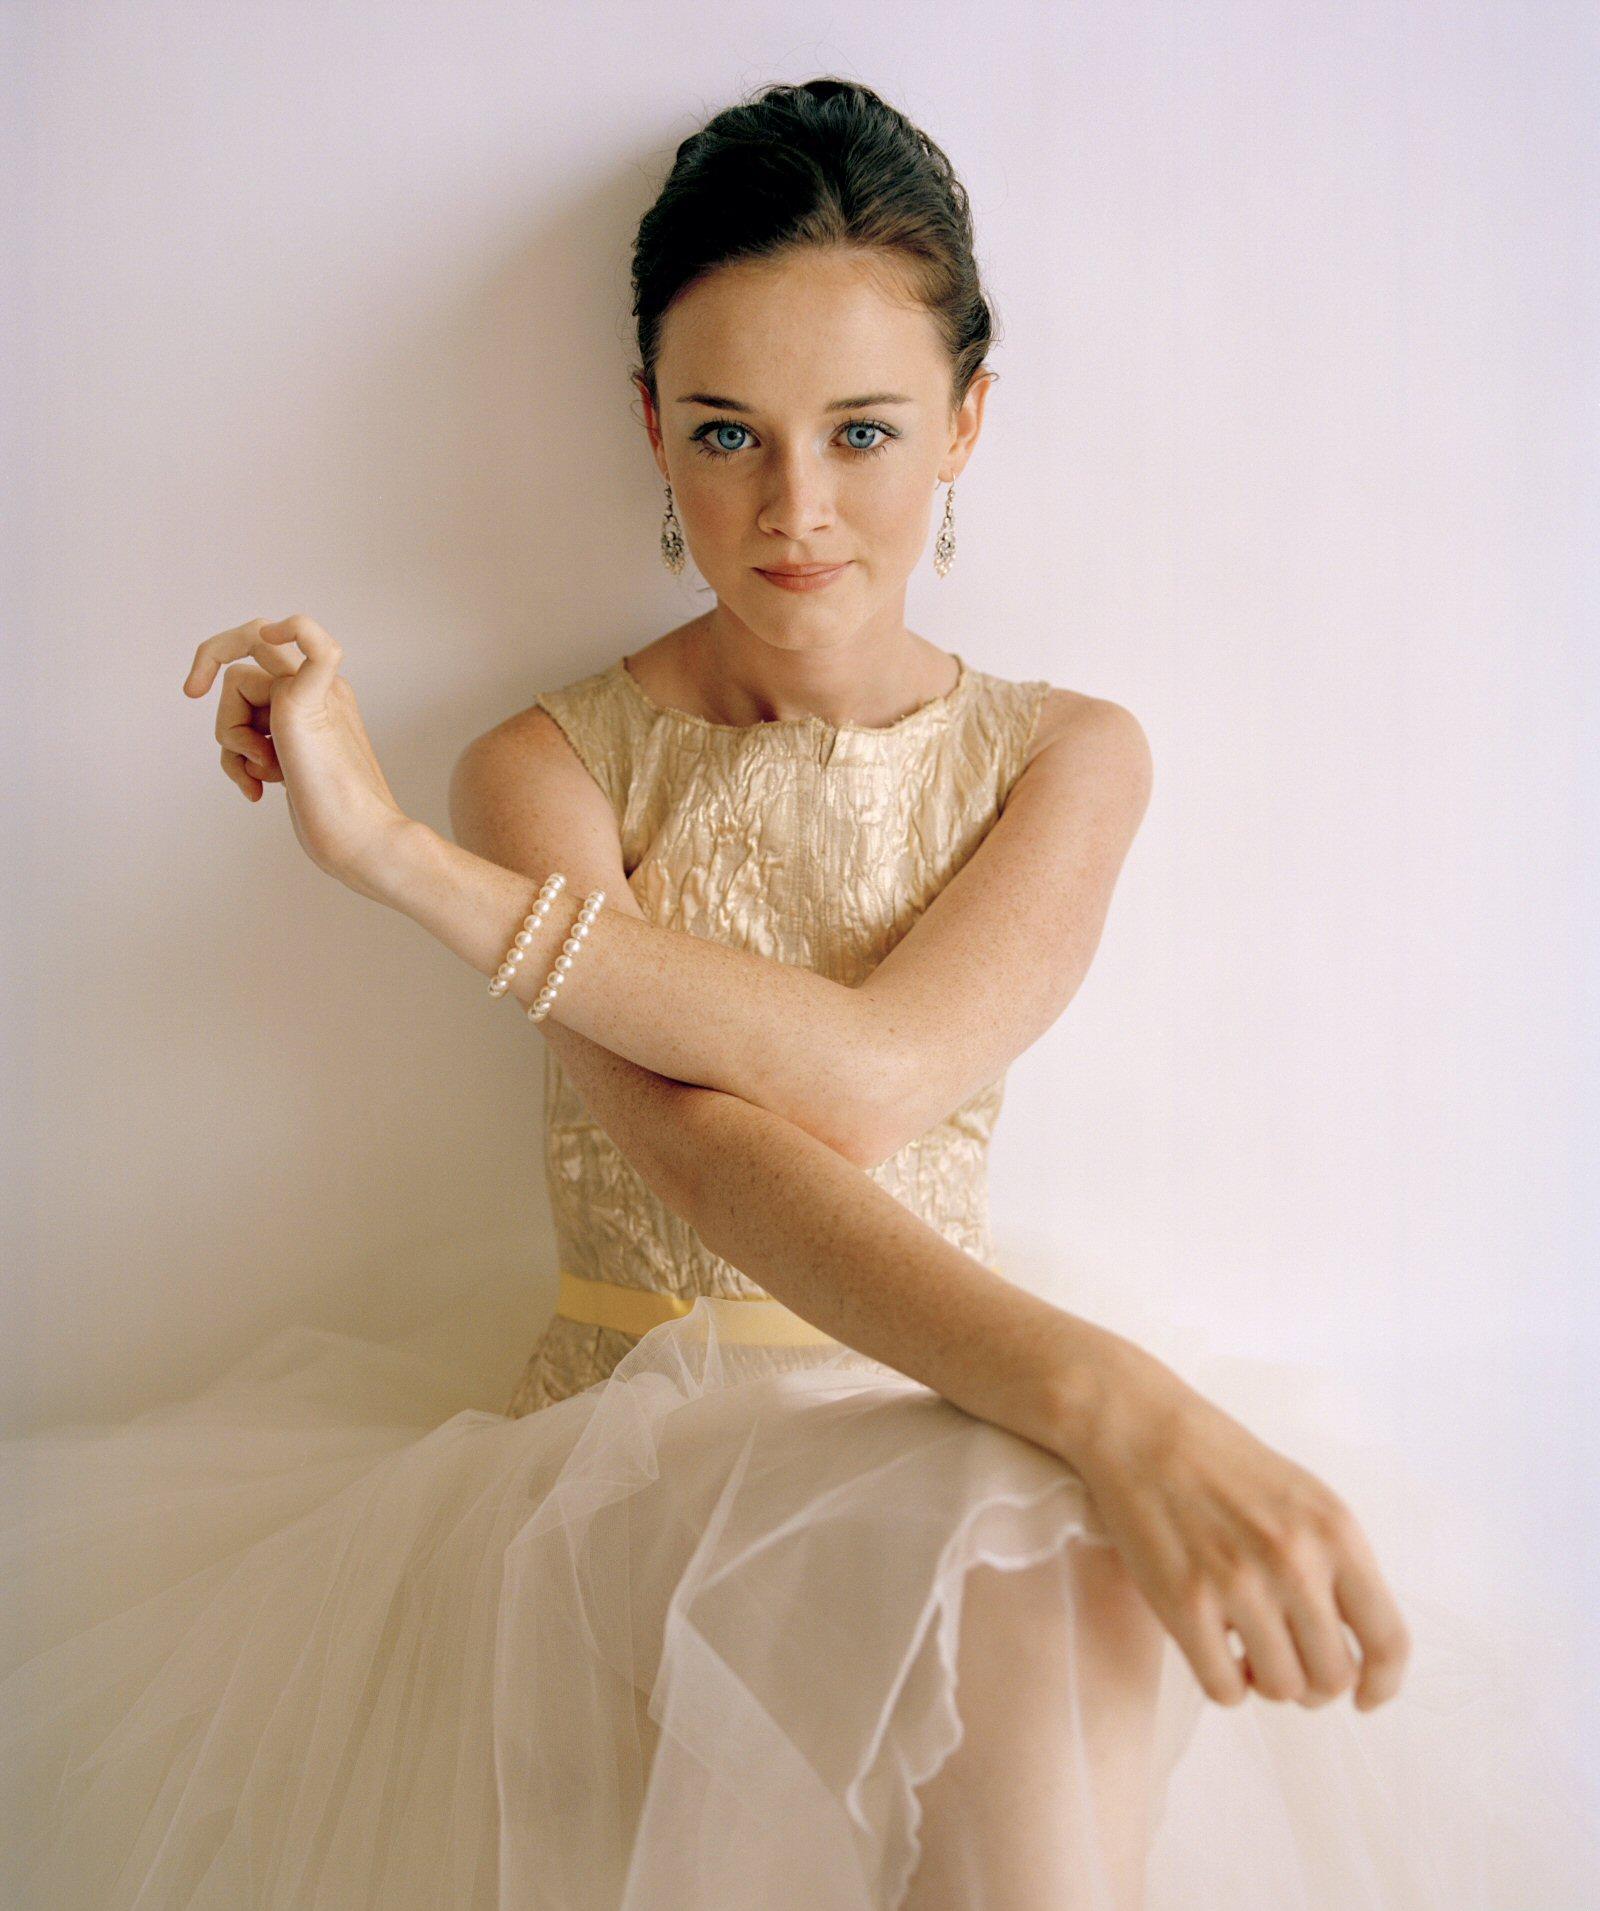 Hot Alexis Bledel Pictures to Get You Off Almost Instantly